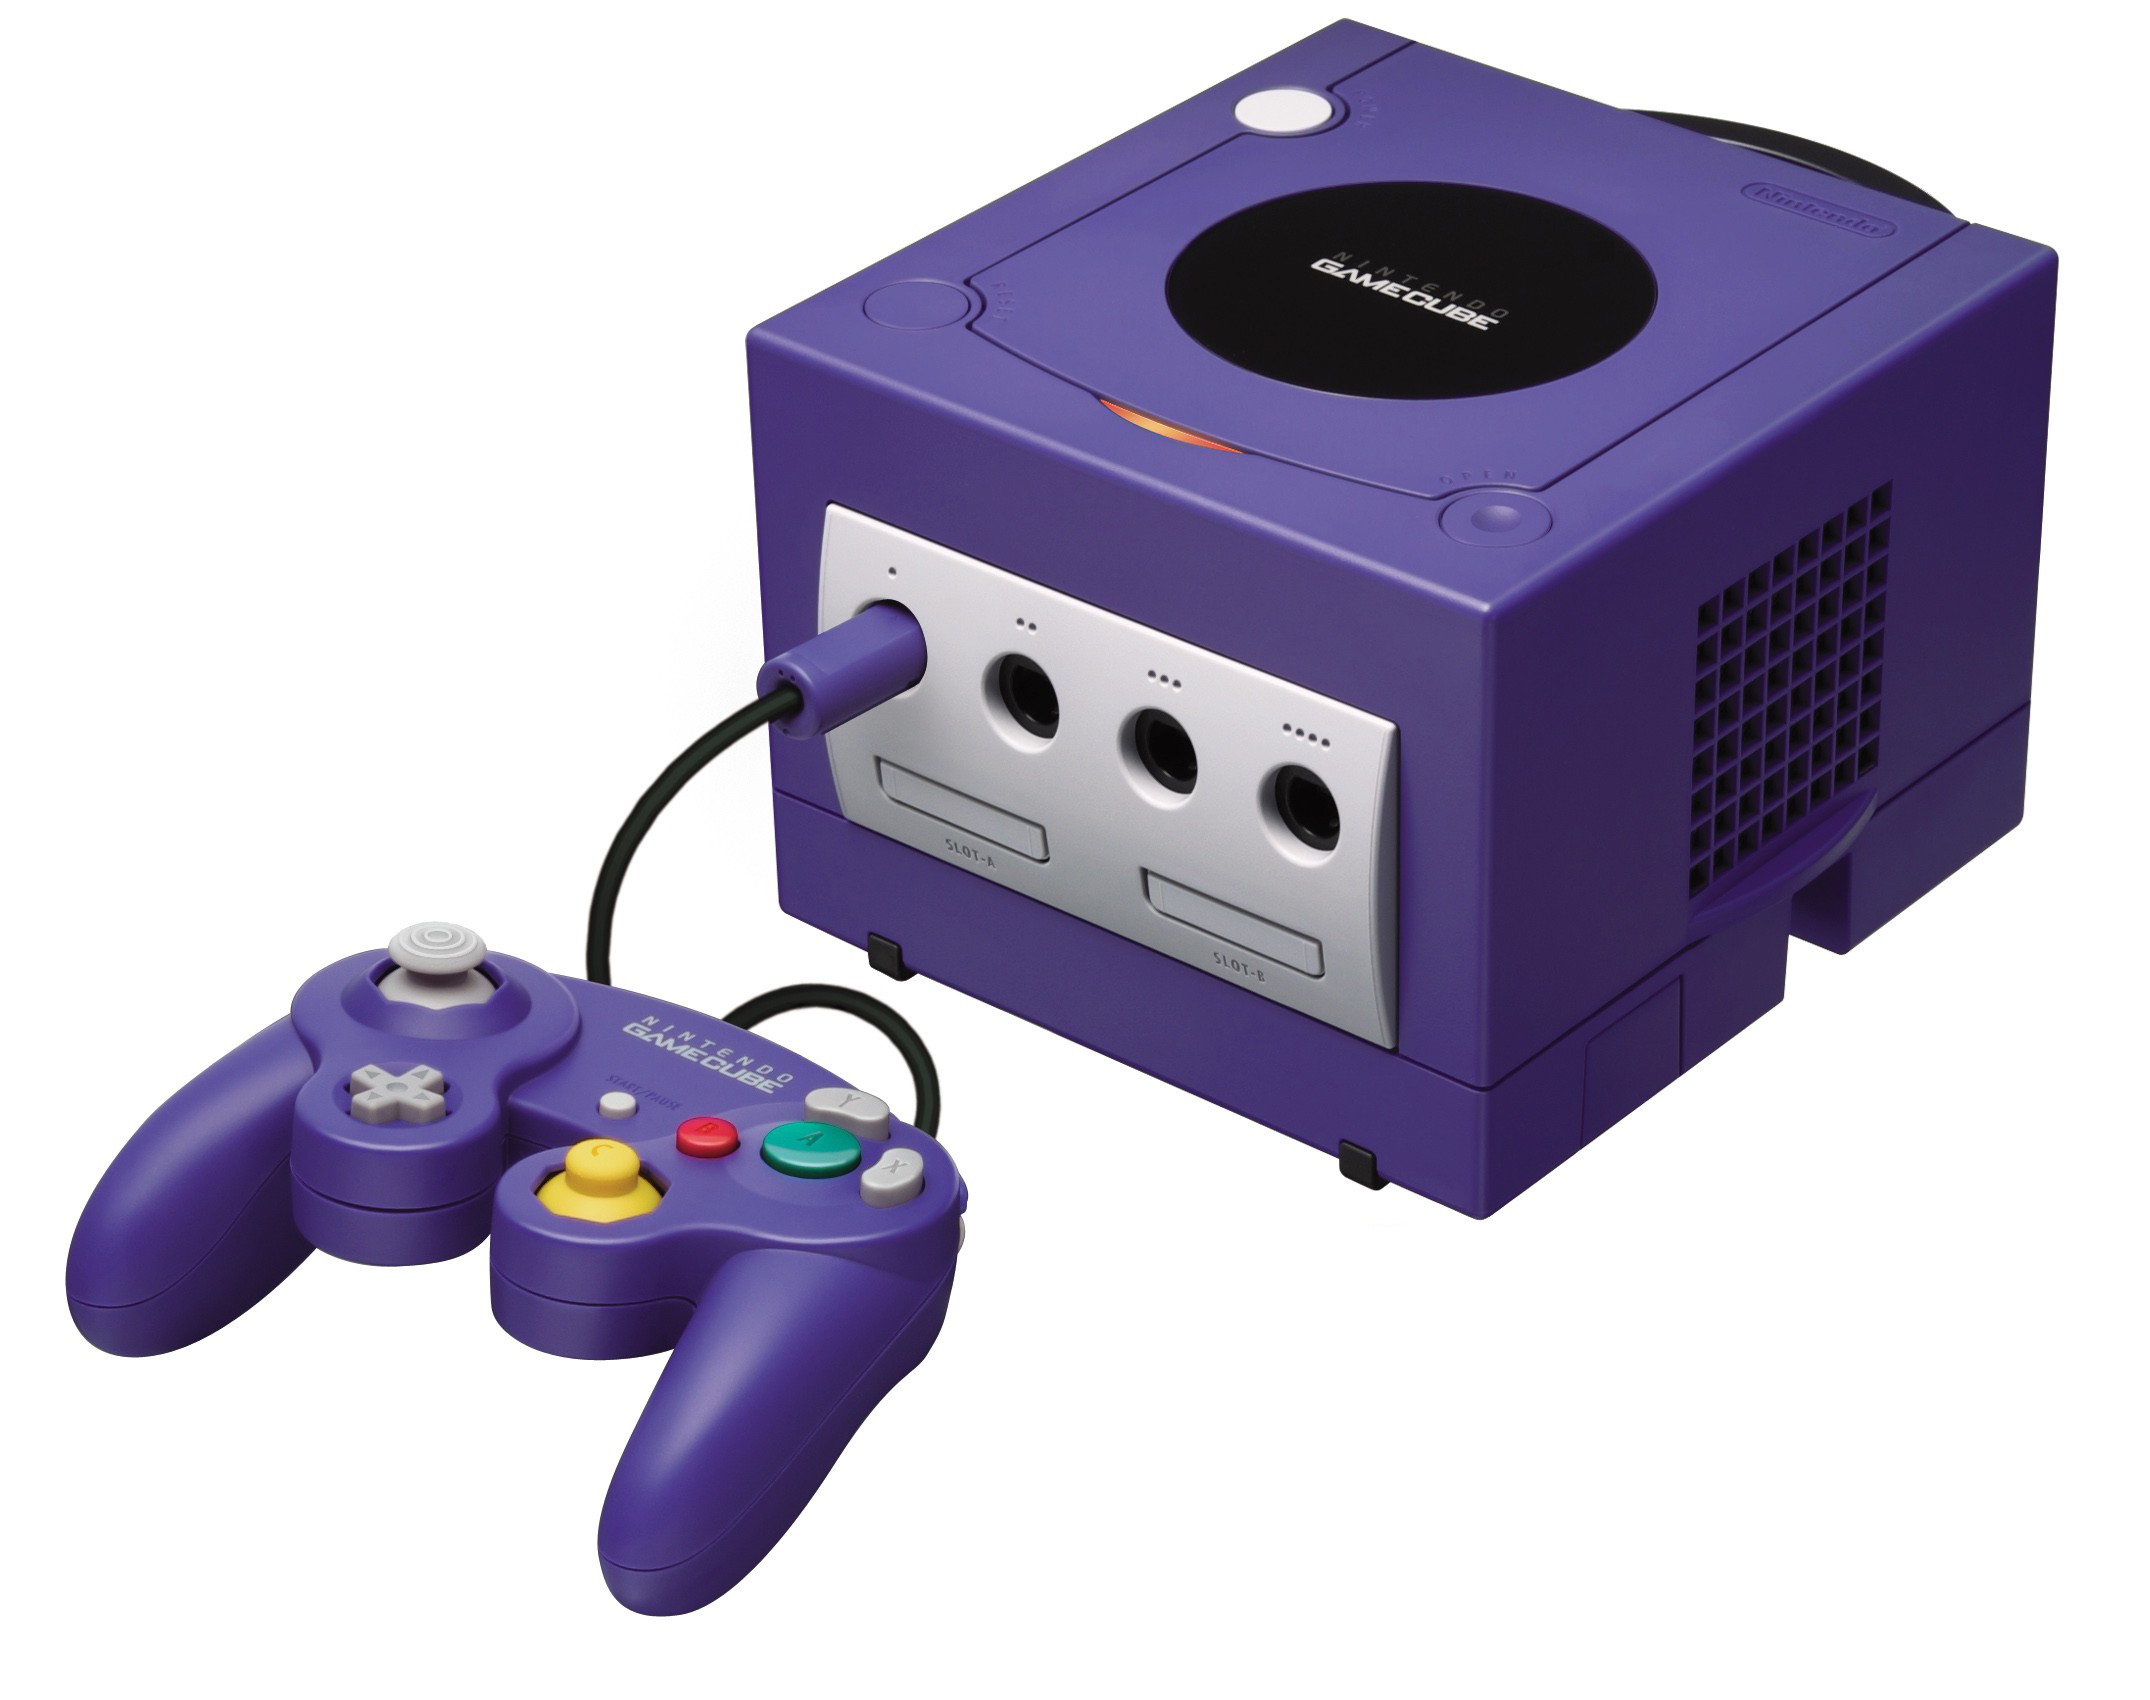 Image result for gamecube